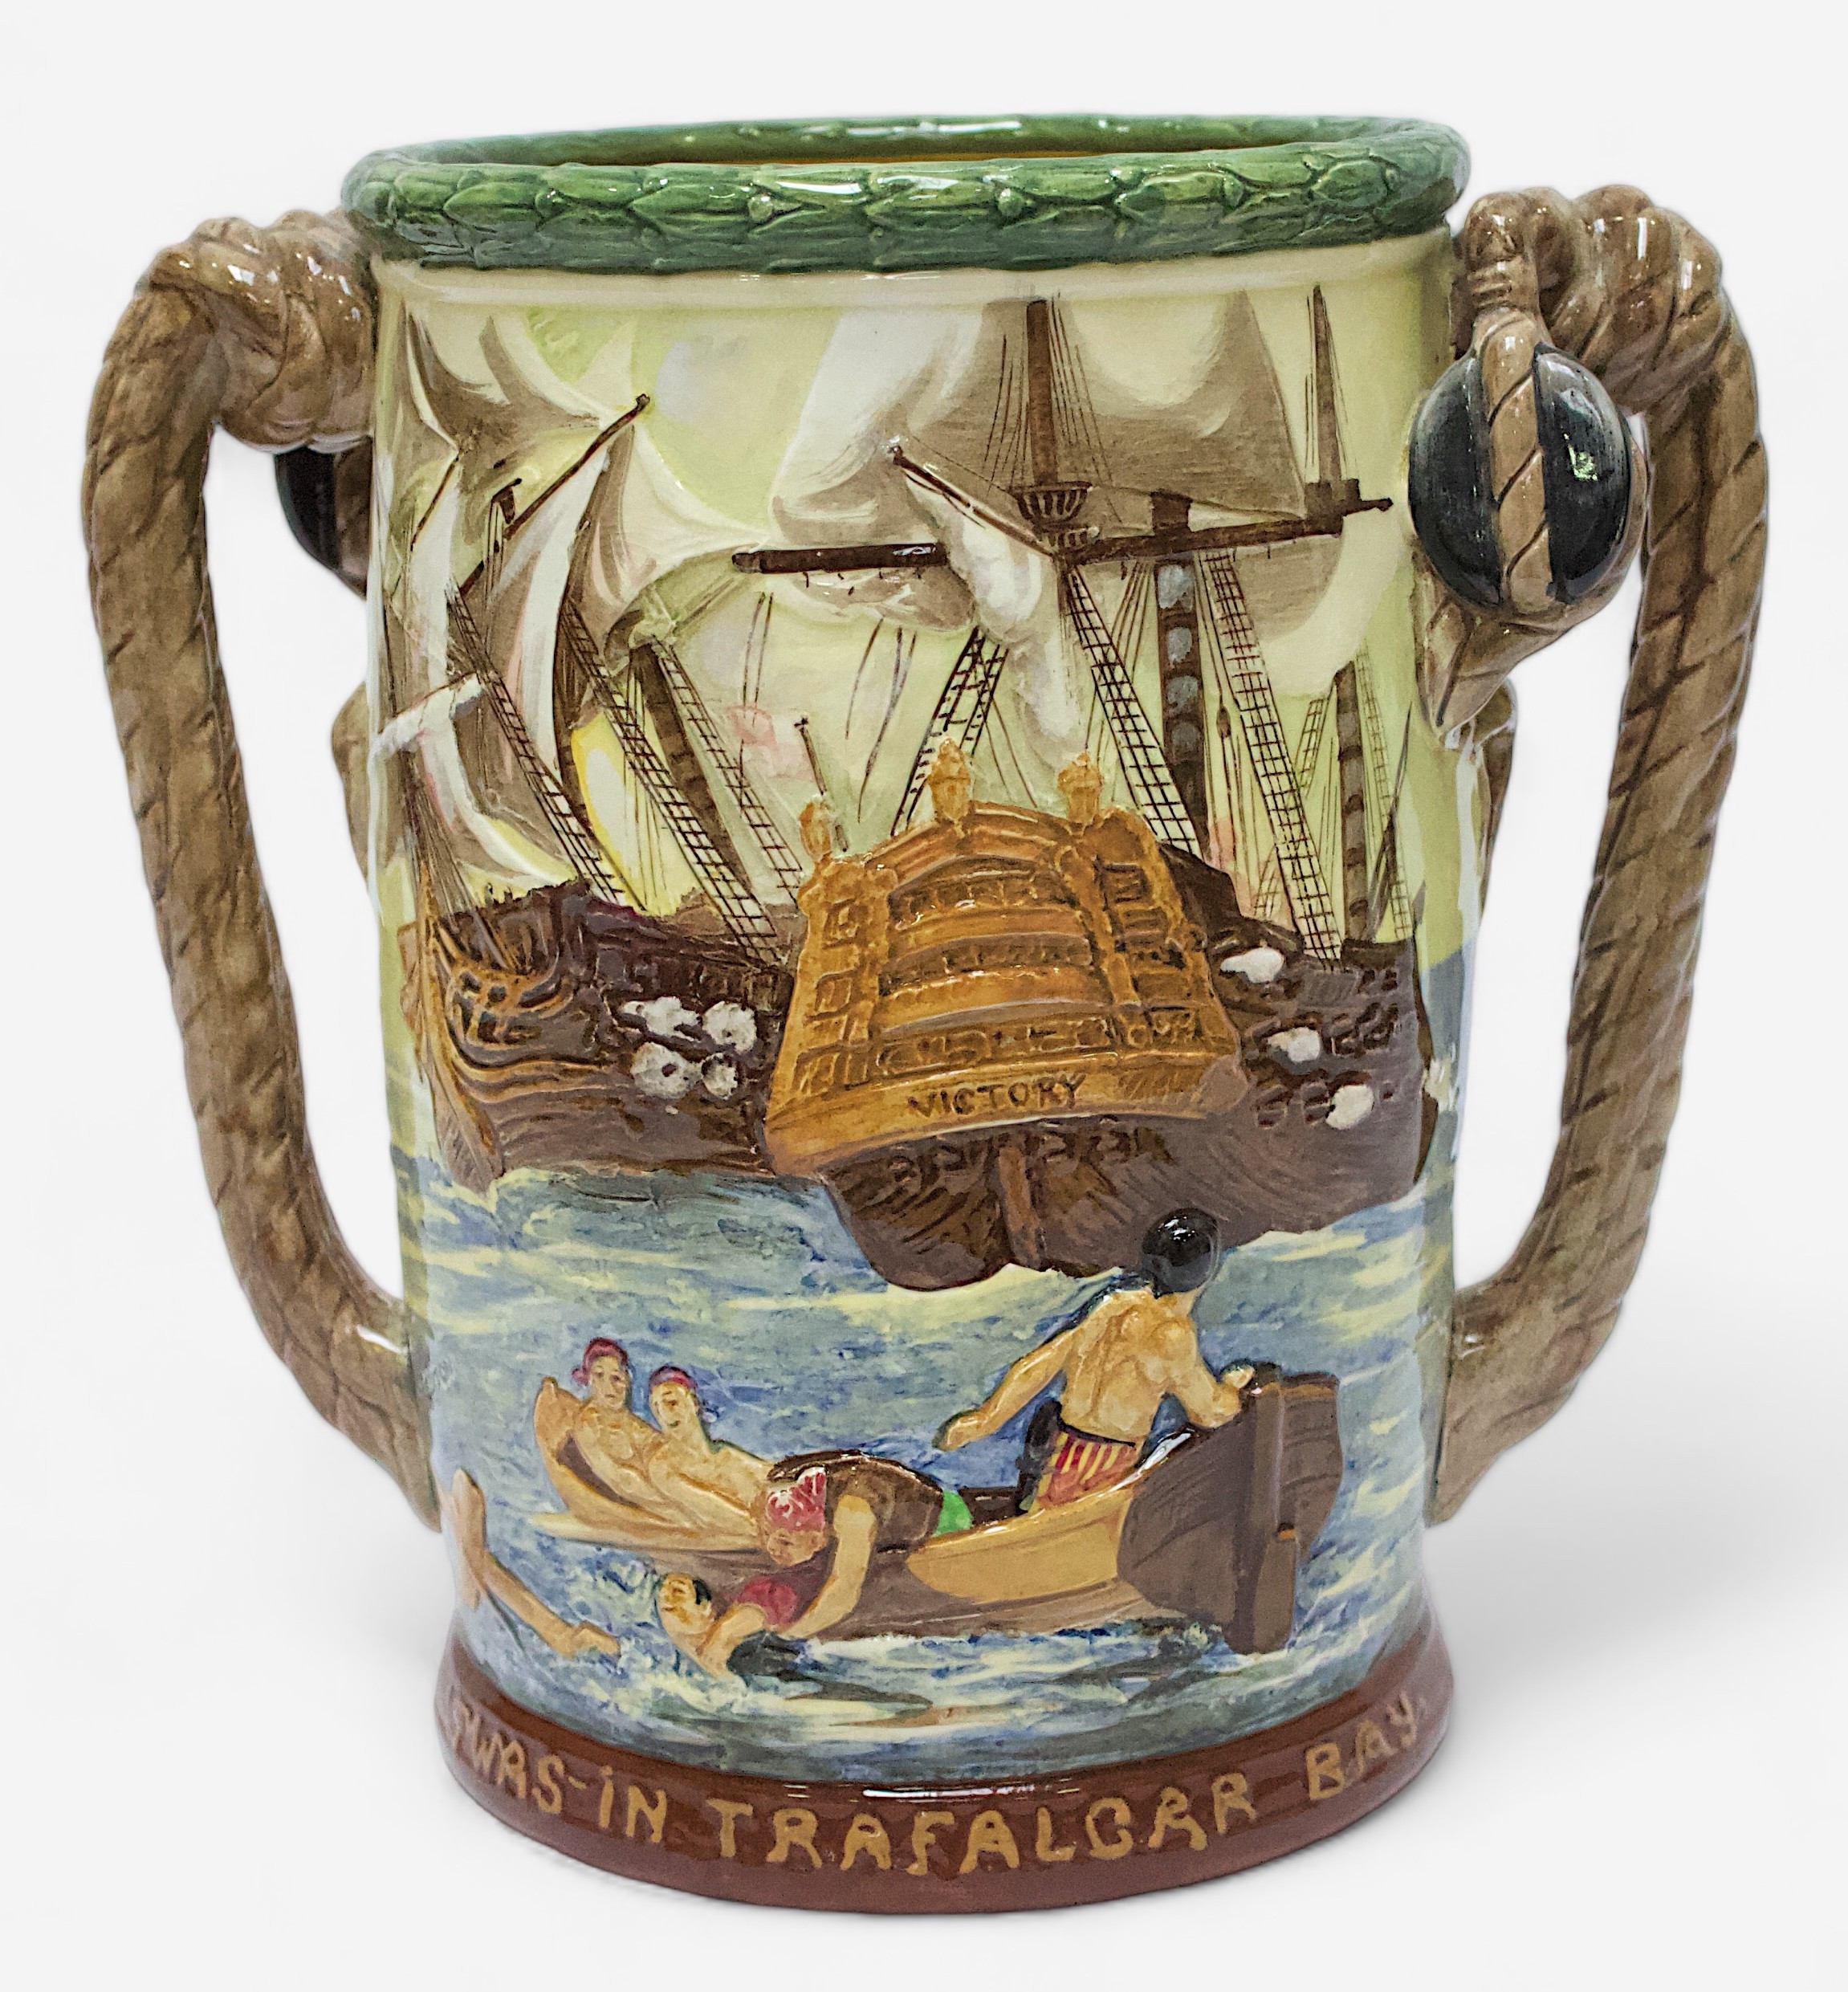 A Royal Doulton loving cup, 'Nelson’, designed by Charles Noke and Harry Fenton, with inscriptions '